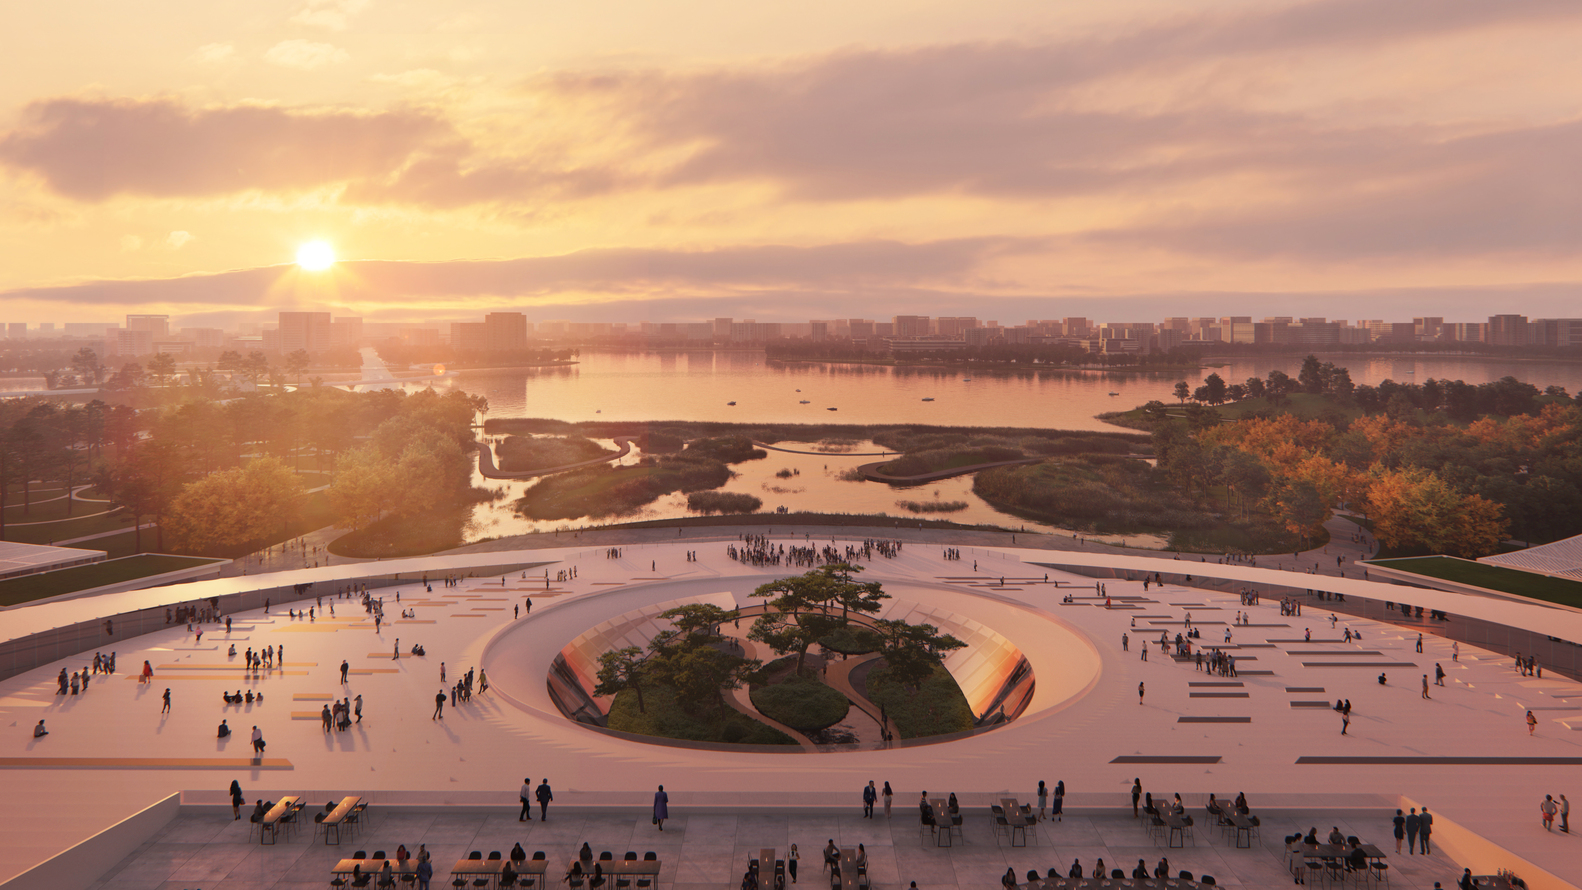 Centro Conferenze Internazionale a Pujiang - credits: henning larsen 